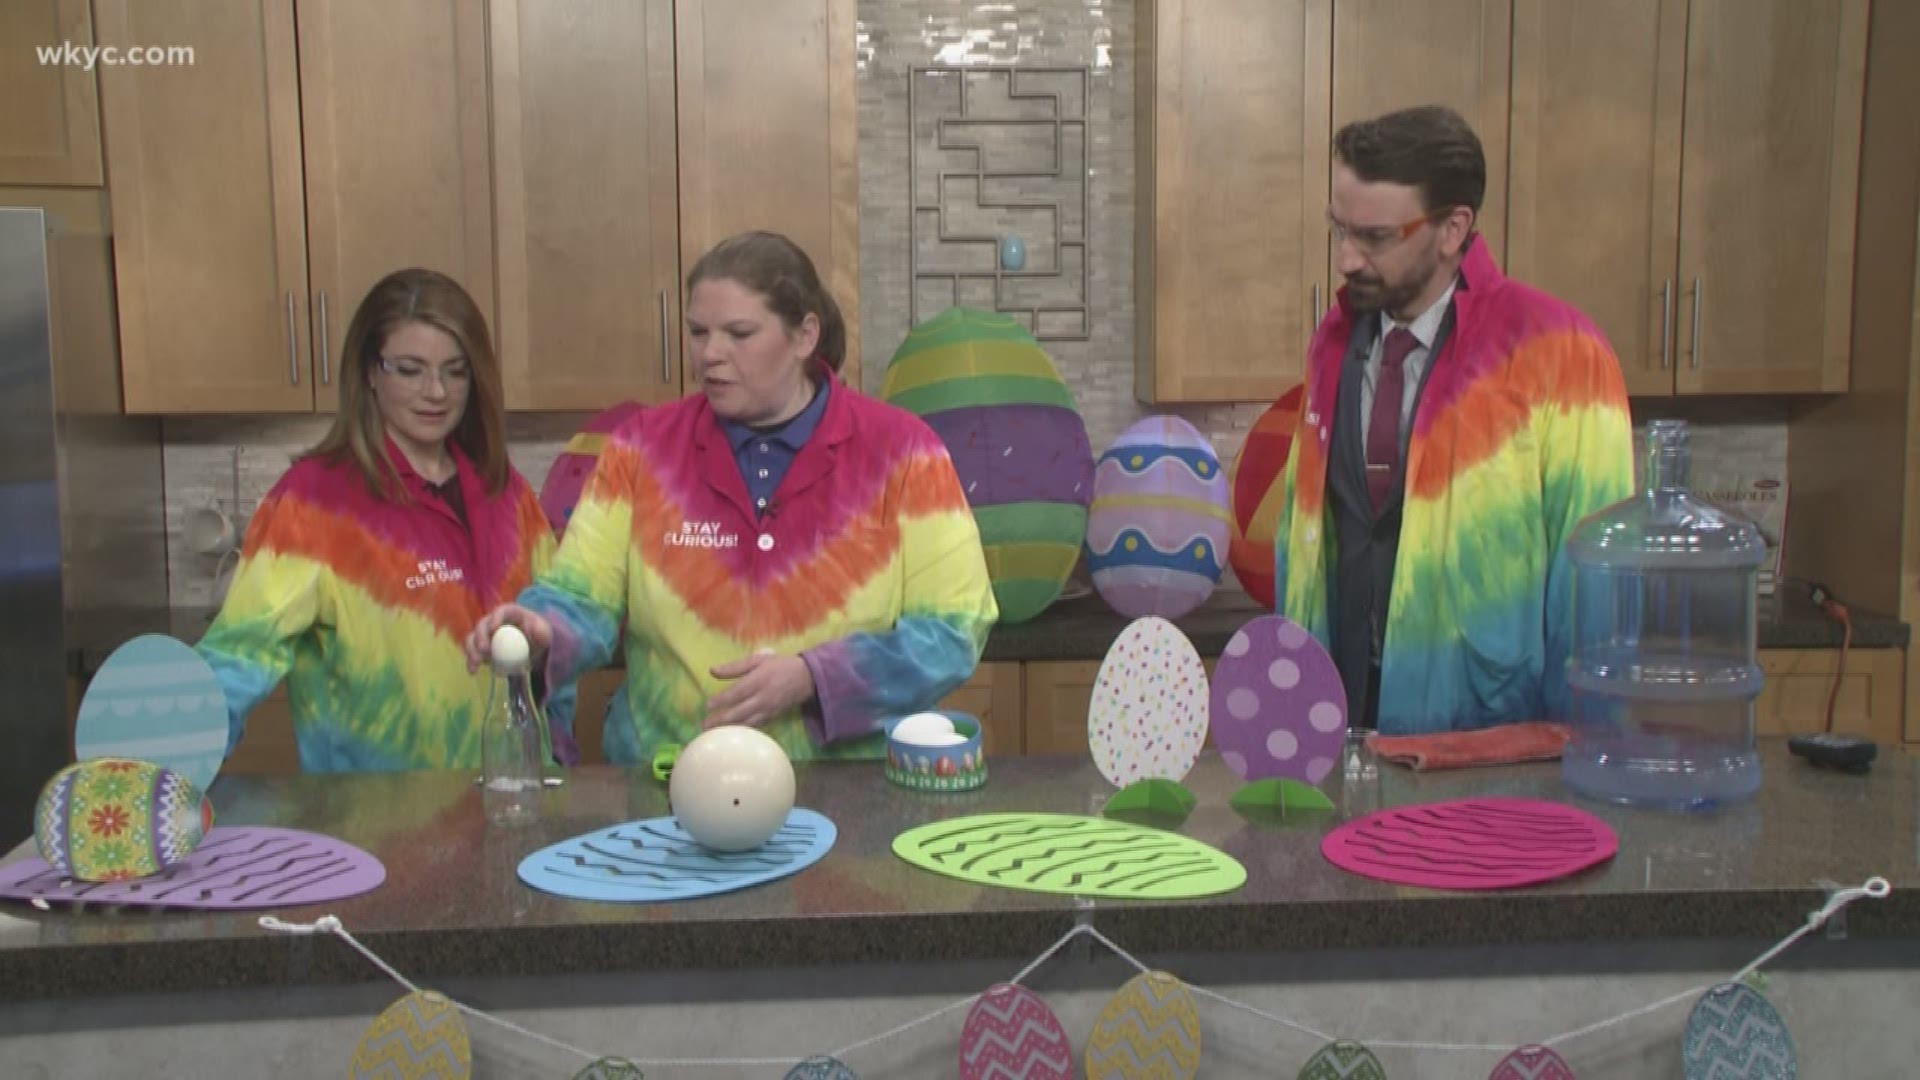 April 19, 2019: Here are some fun experiments -- or egg-speriments courtesy of the Great Lakes Science Center.